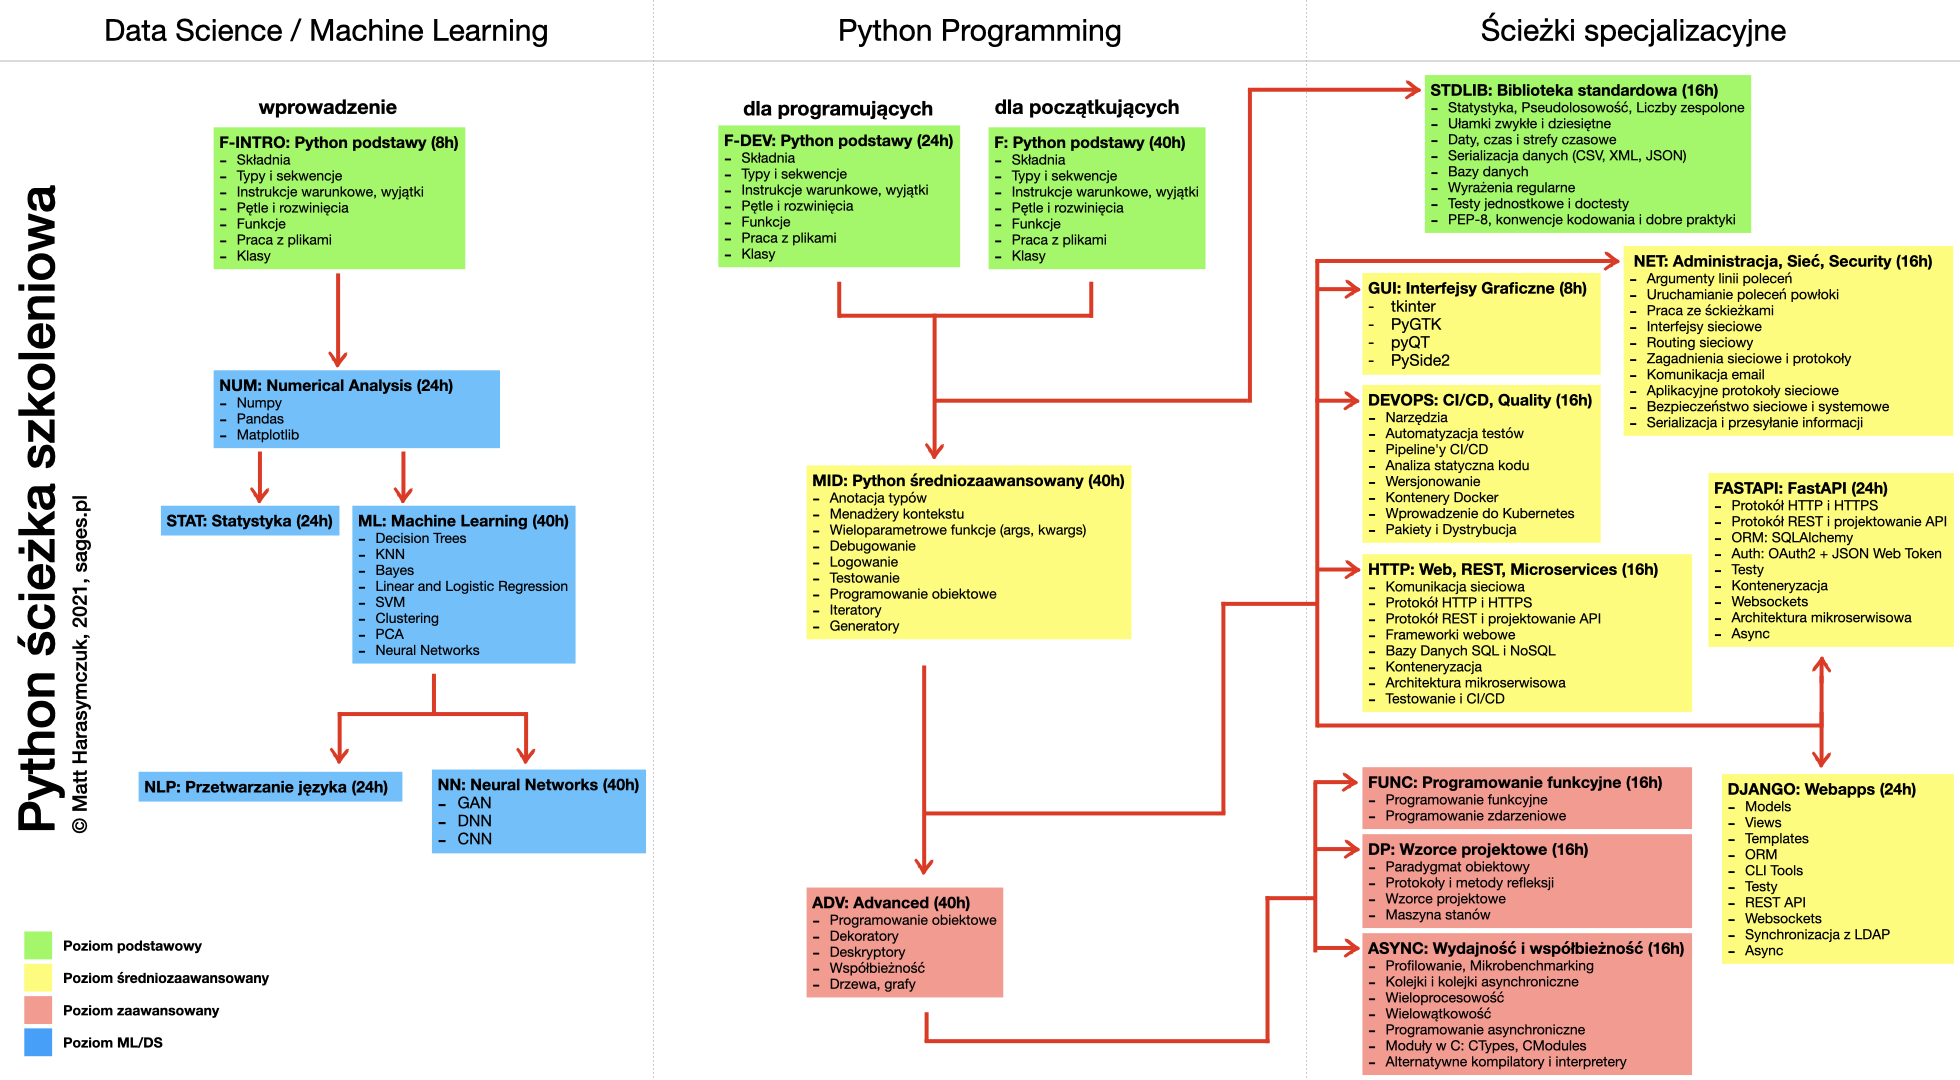 about/img/python-training-path.png